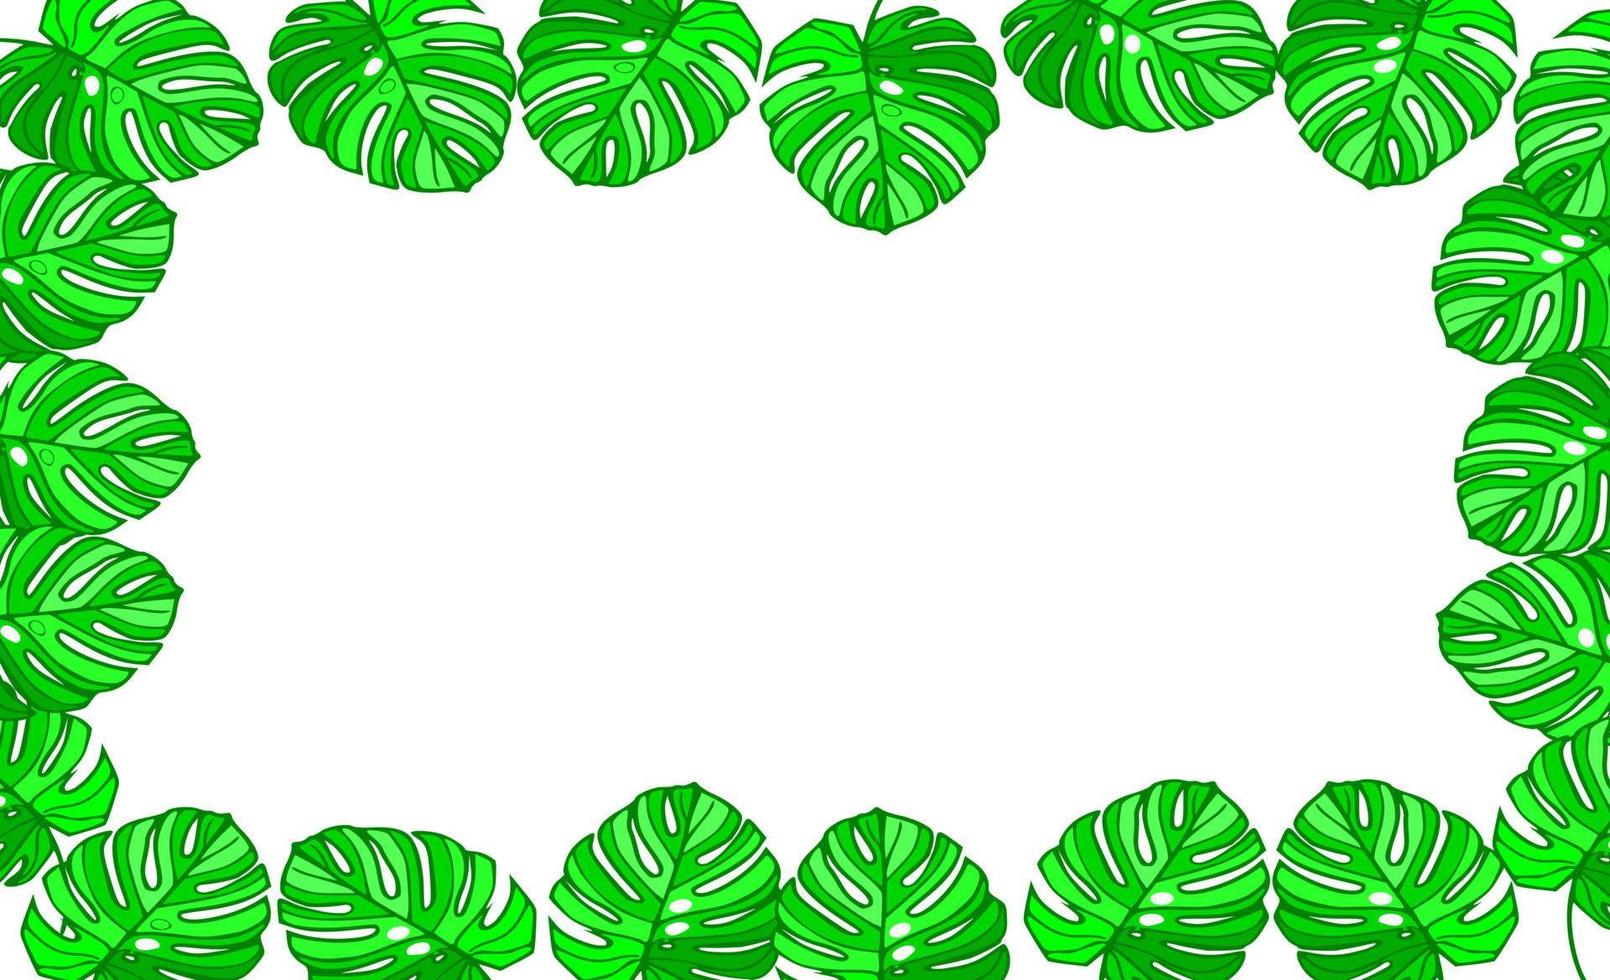 Monstera leaves  border  frame with white space for text vector